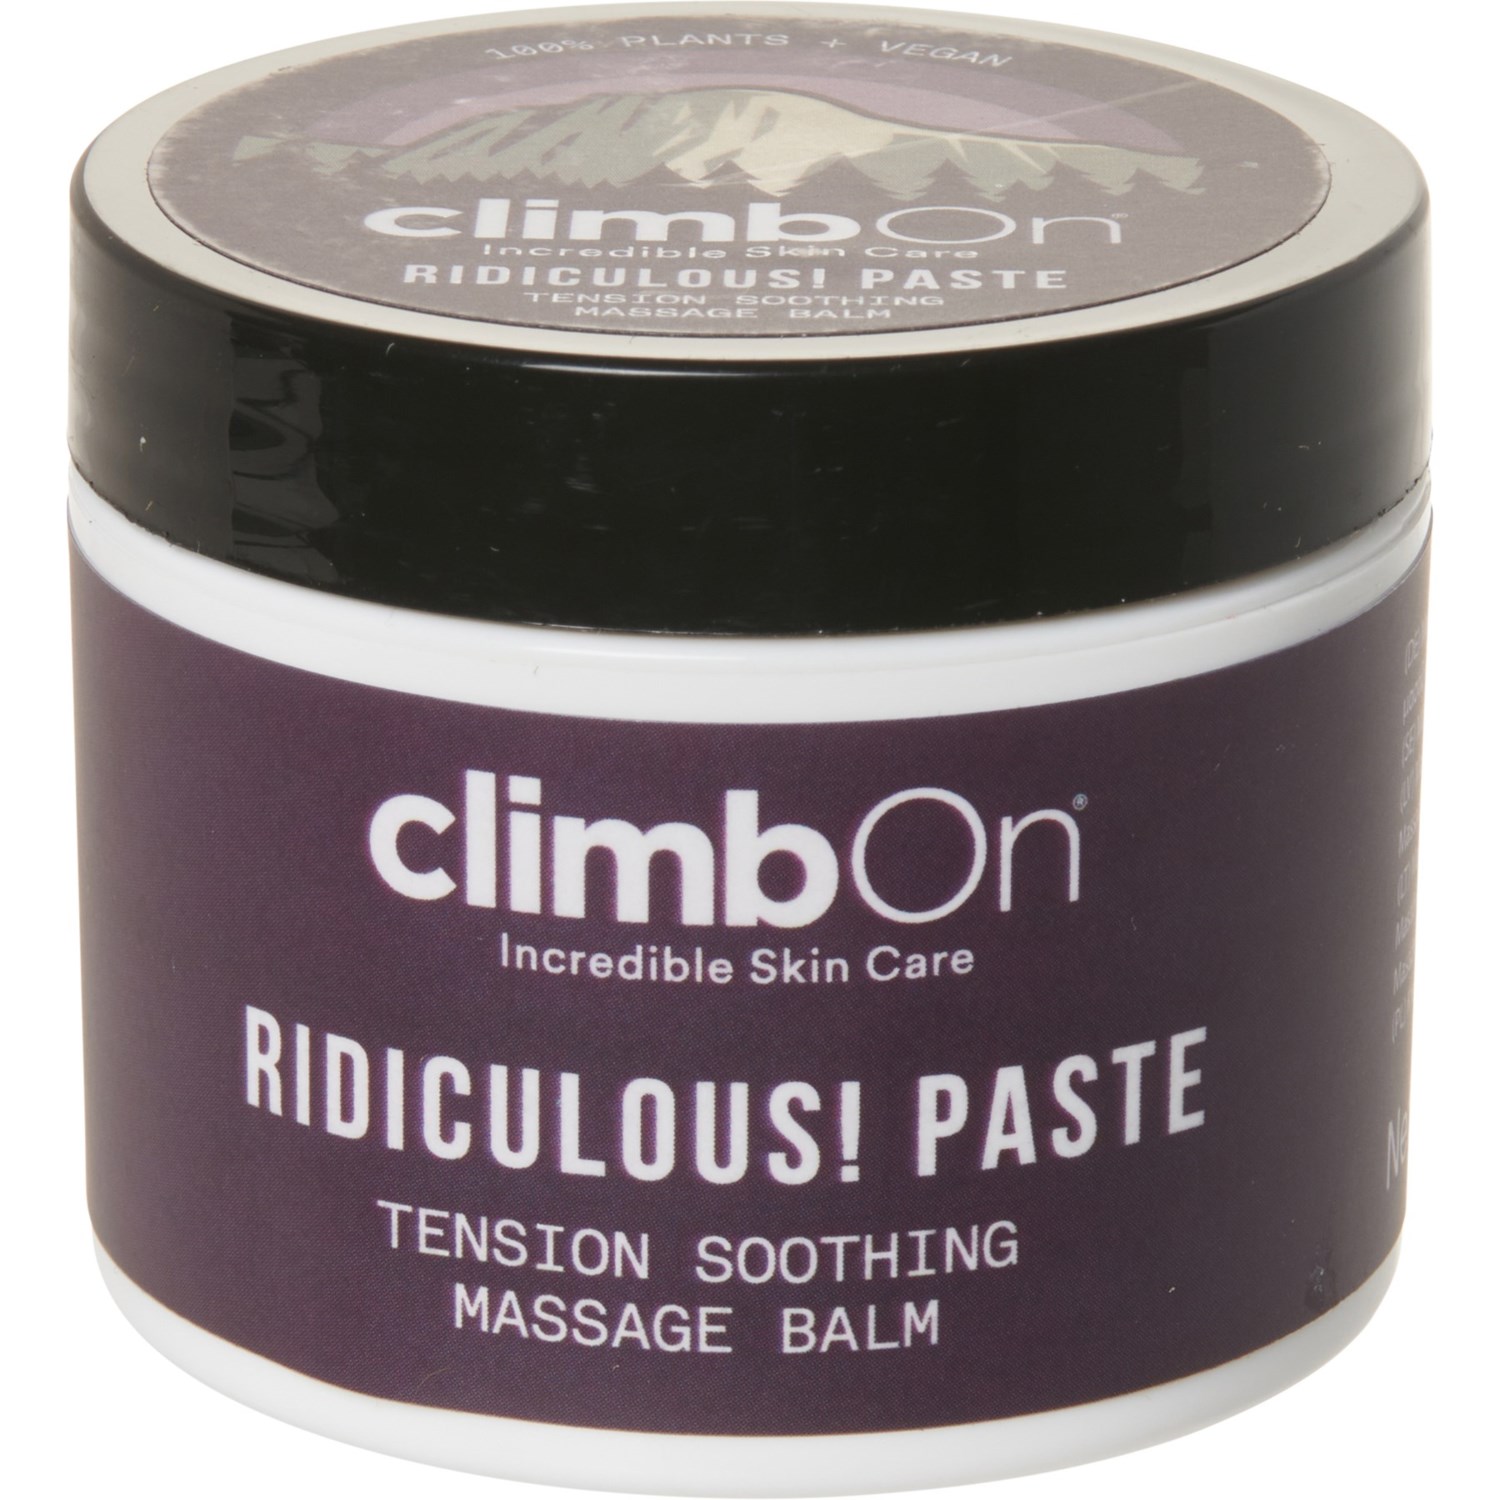 ClimbOn Ridiculous! Tension-Soothing Massage Balm Paste - 2 oz.